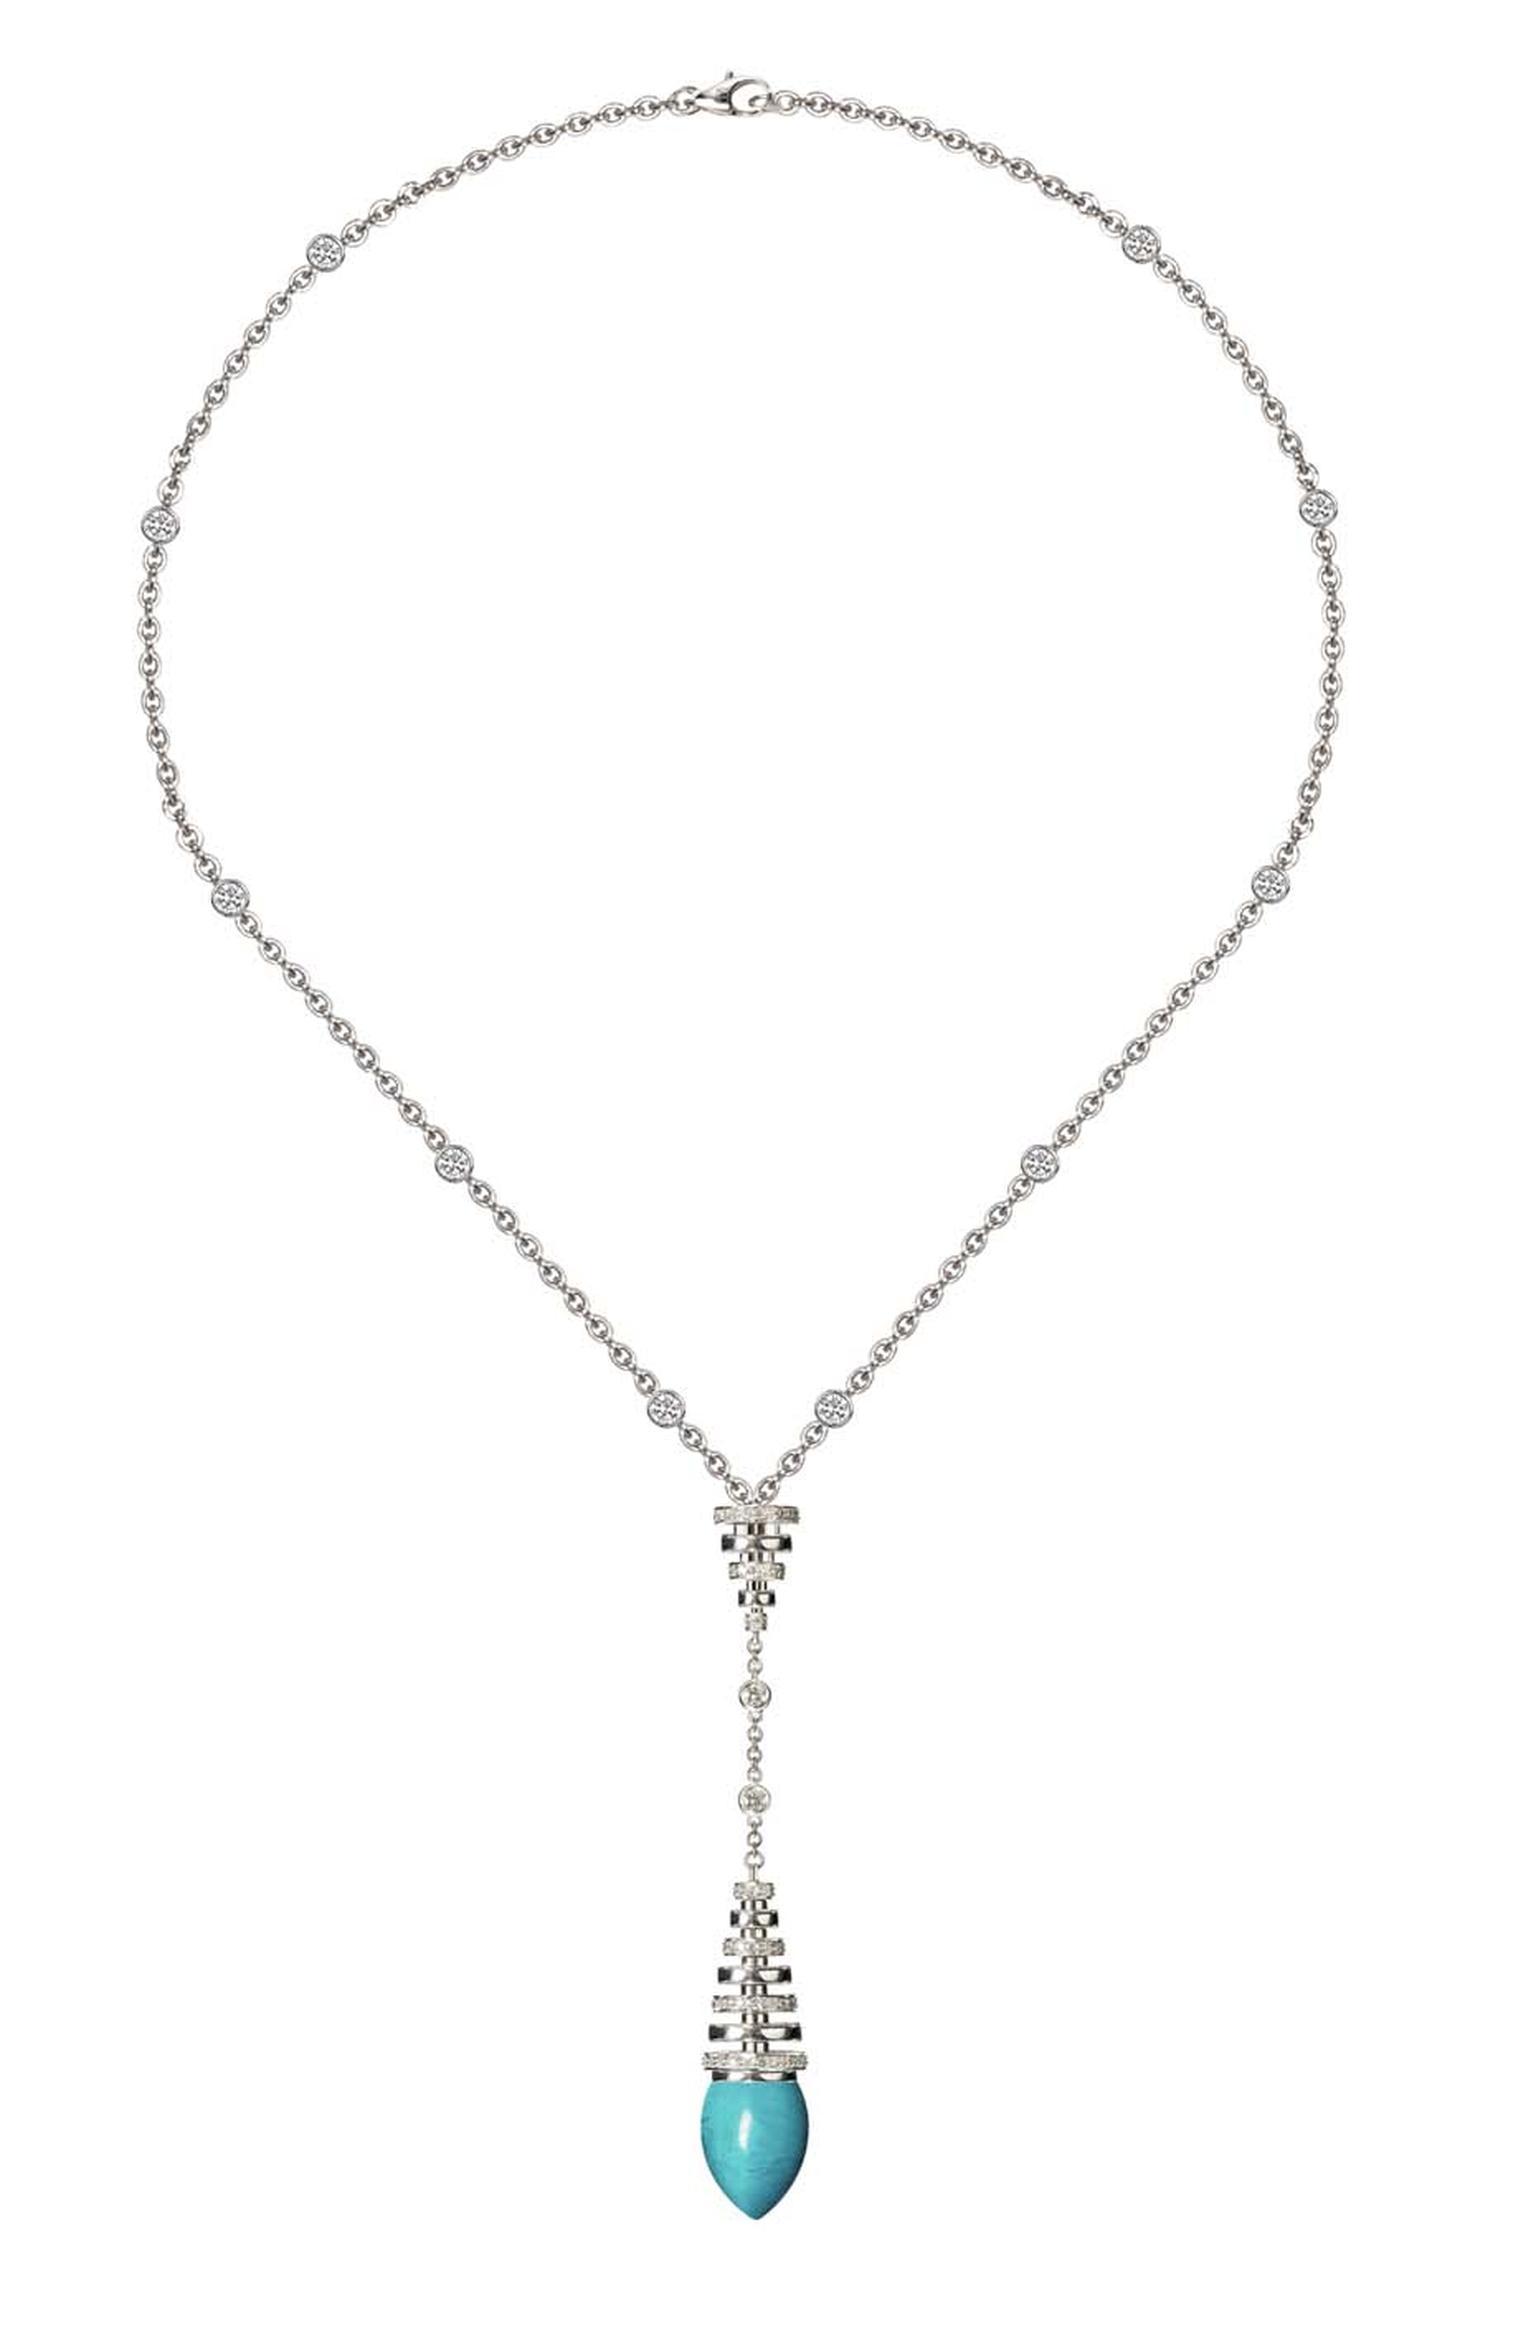 Avakian turquoise necklace in white gold with diamonds, from the Riviera collection.